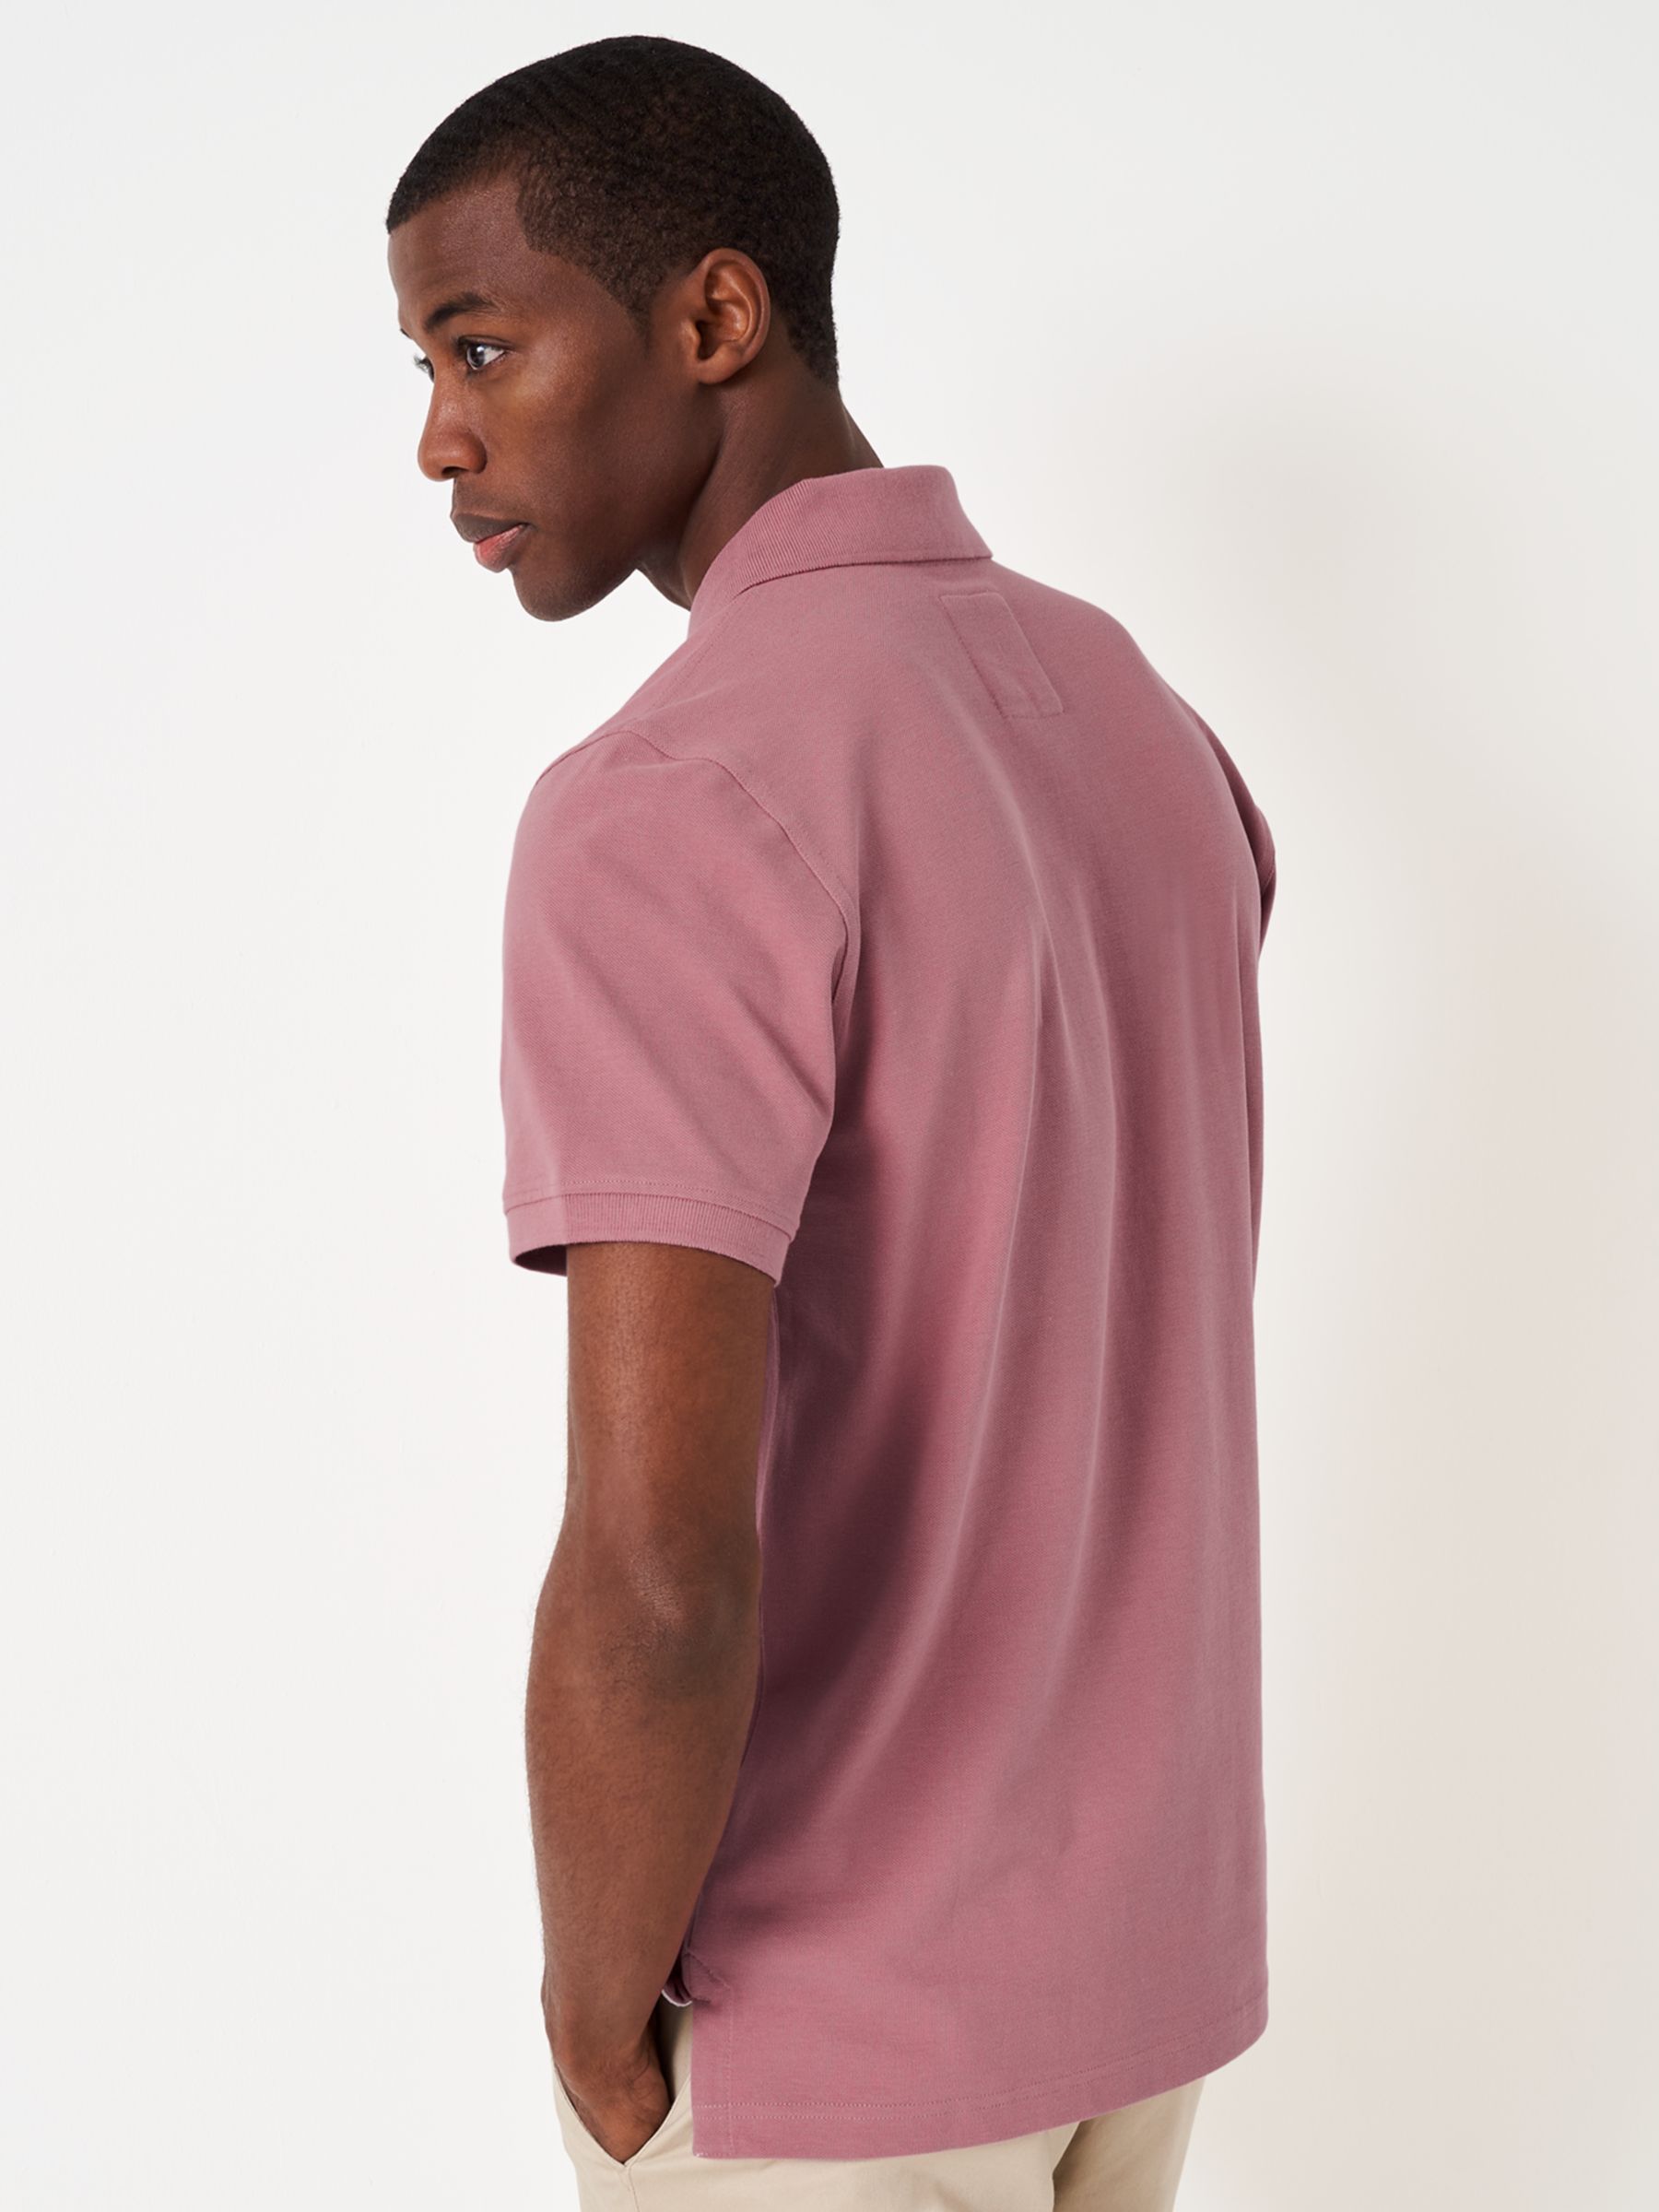 Crew Clothing Classic Pique Polo Shirt, Mid Pink at John Lewis & Partners